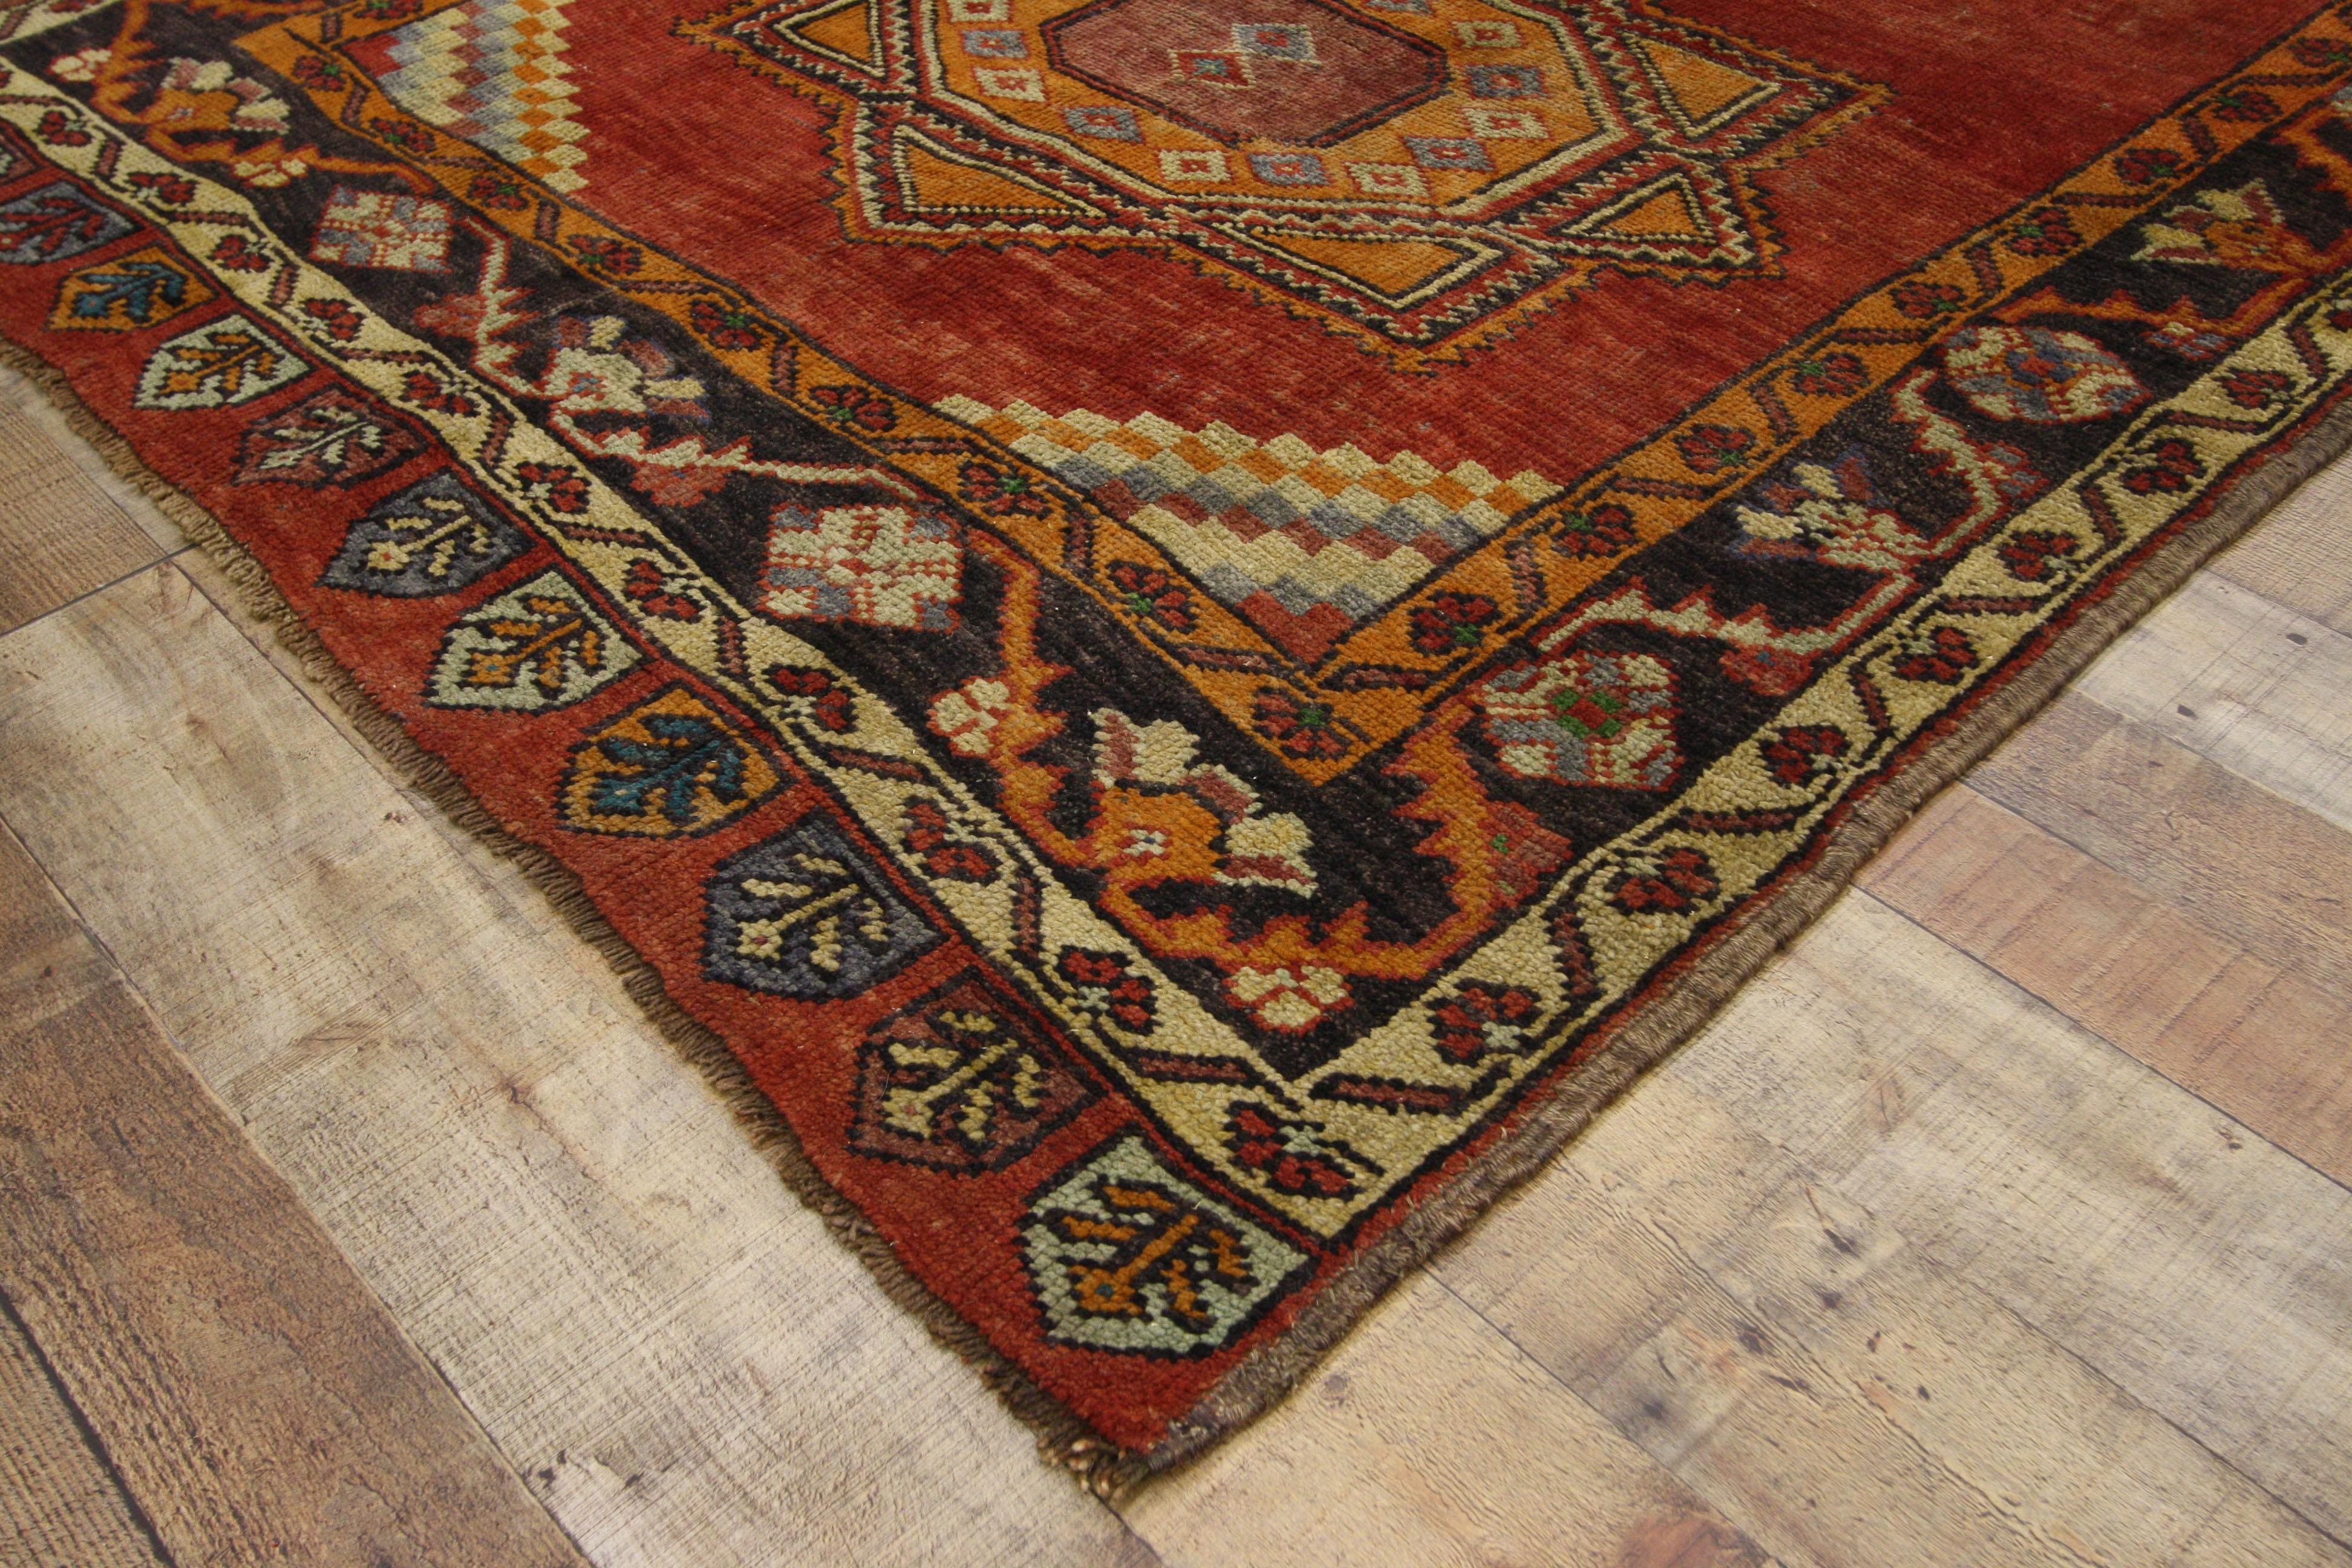 52400 Vintage Turkish Oushak Hallway Runner with Craftsman Tribal Style 04’06 x 10’00. This hand knotted wool vintage Turkish Oushak runner features three serrated-edged octagram medallions spread across the centre of an abrashed scarlet red field.